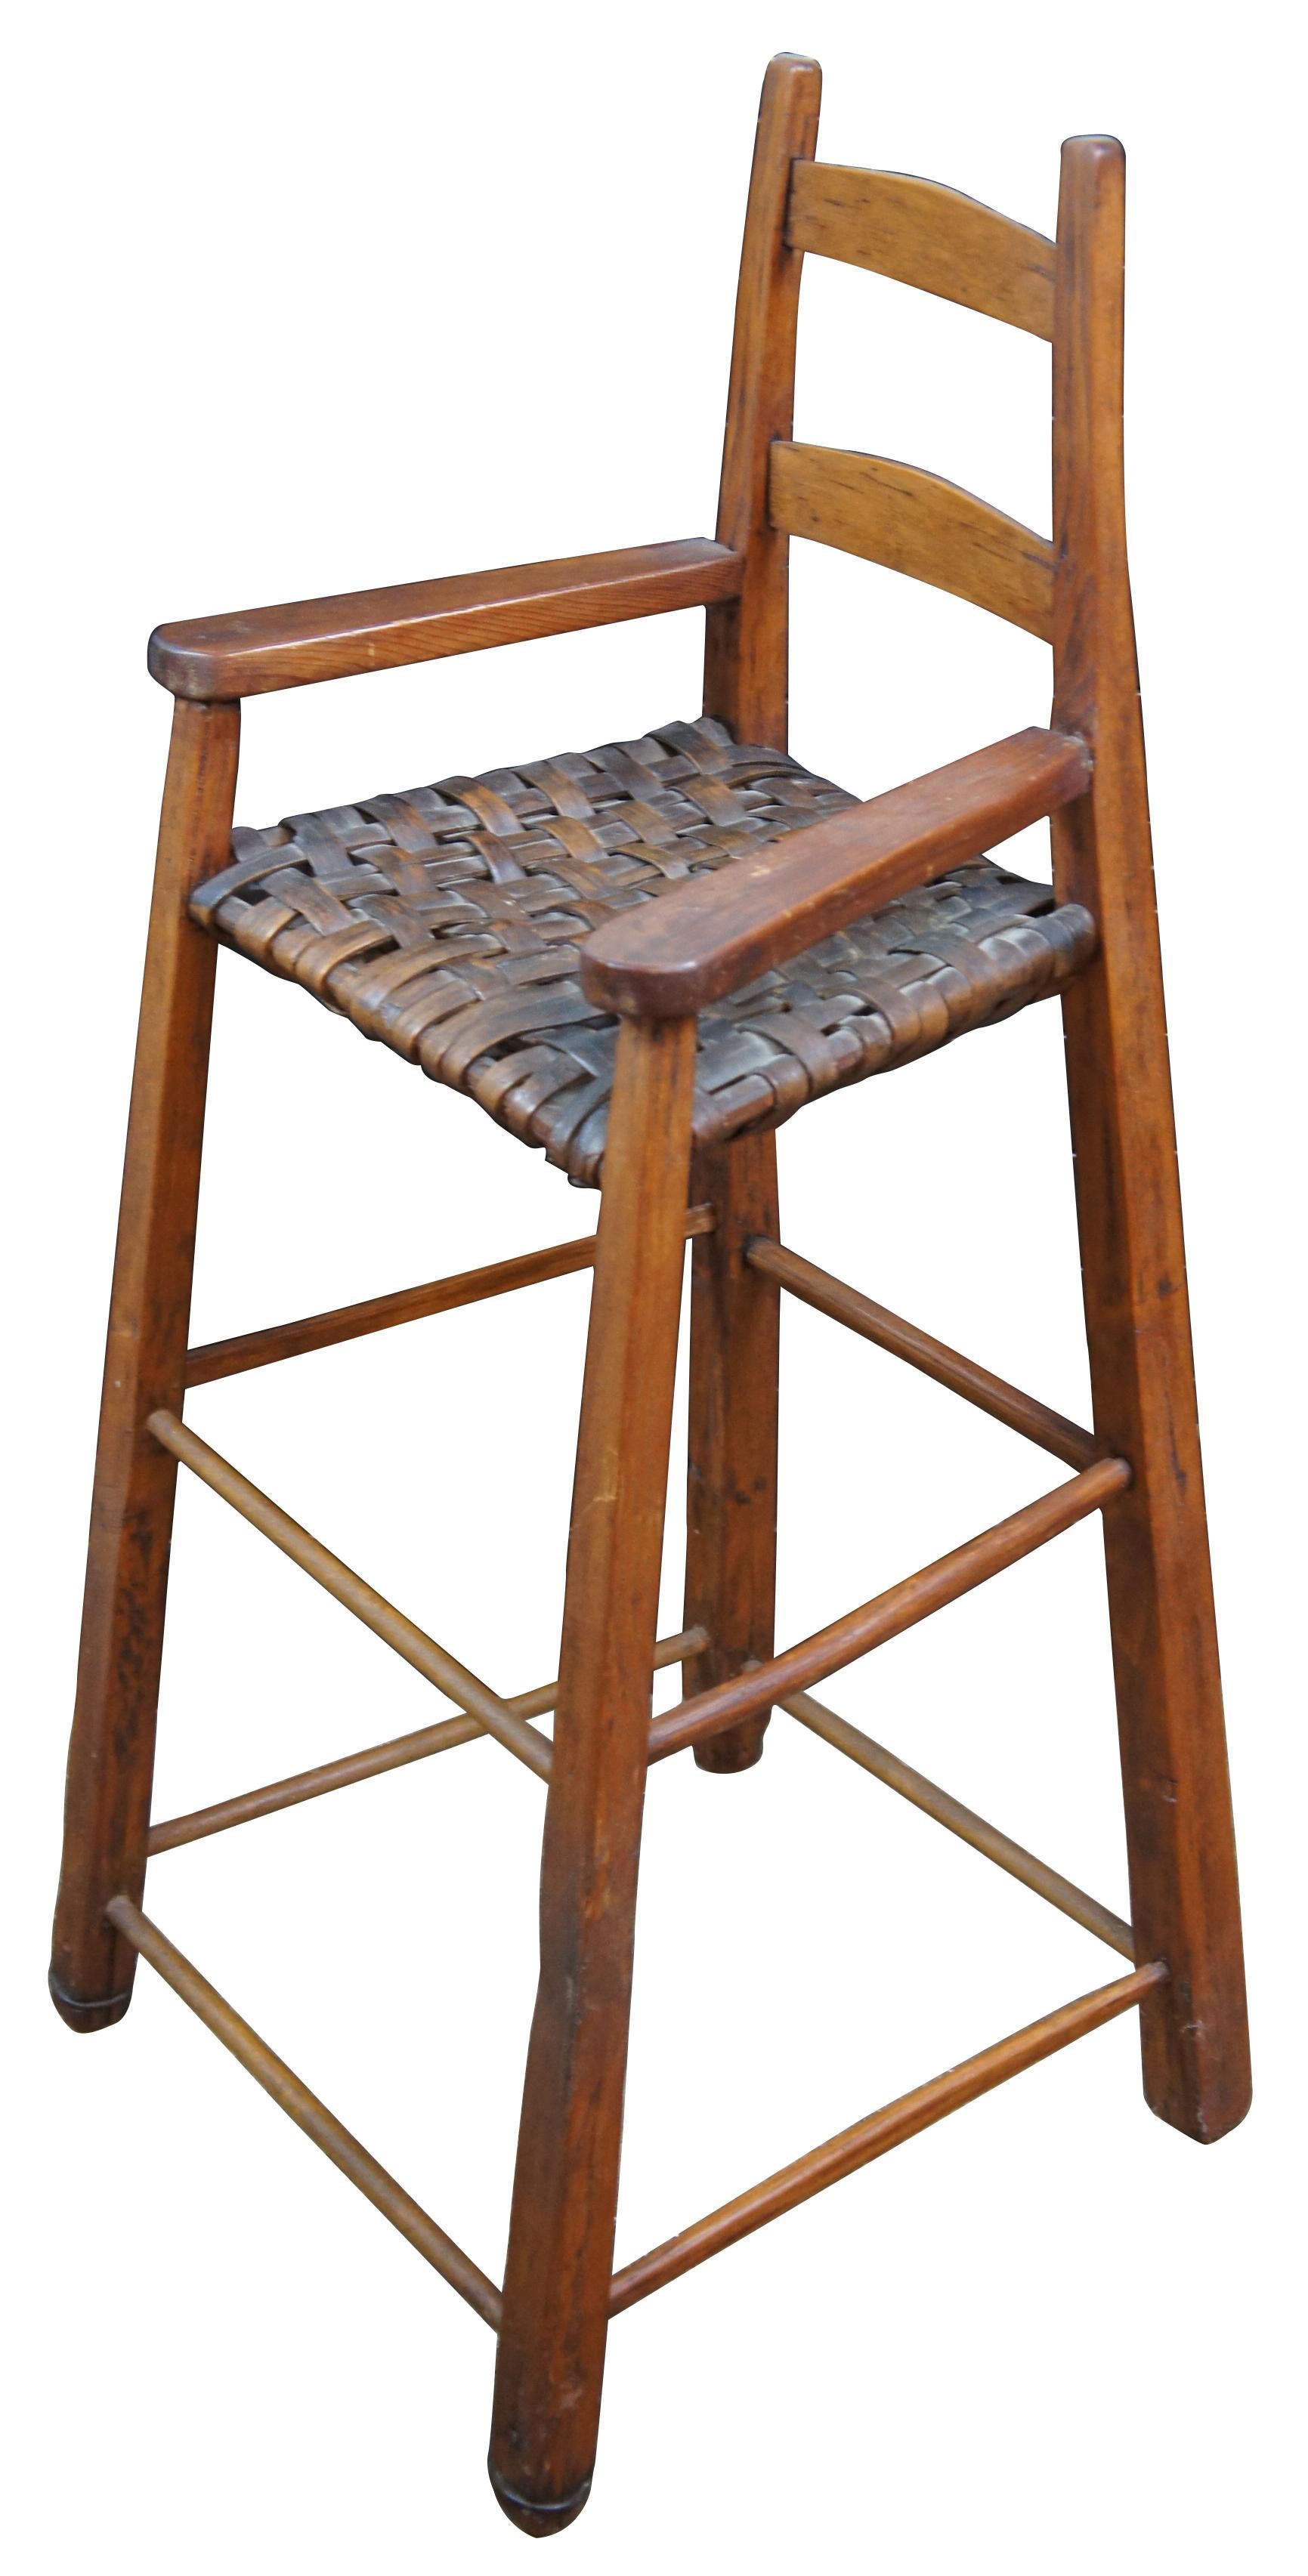 Antique handmade pine and rattan small childs or doll sized high chair with woven seat.
 